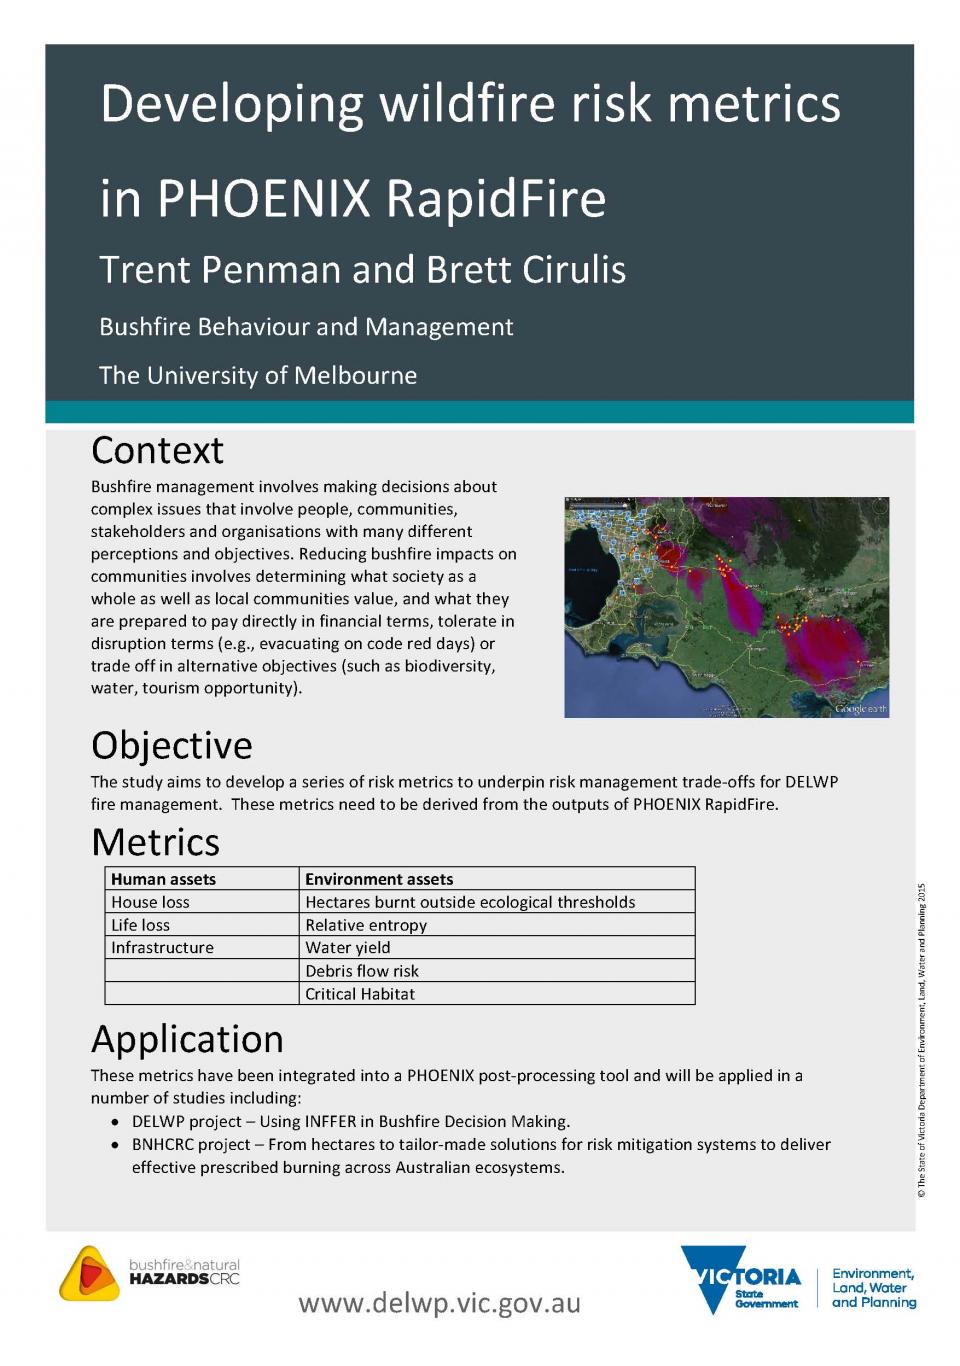 Trent Penman Conference Poster 2016